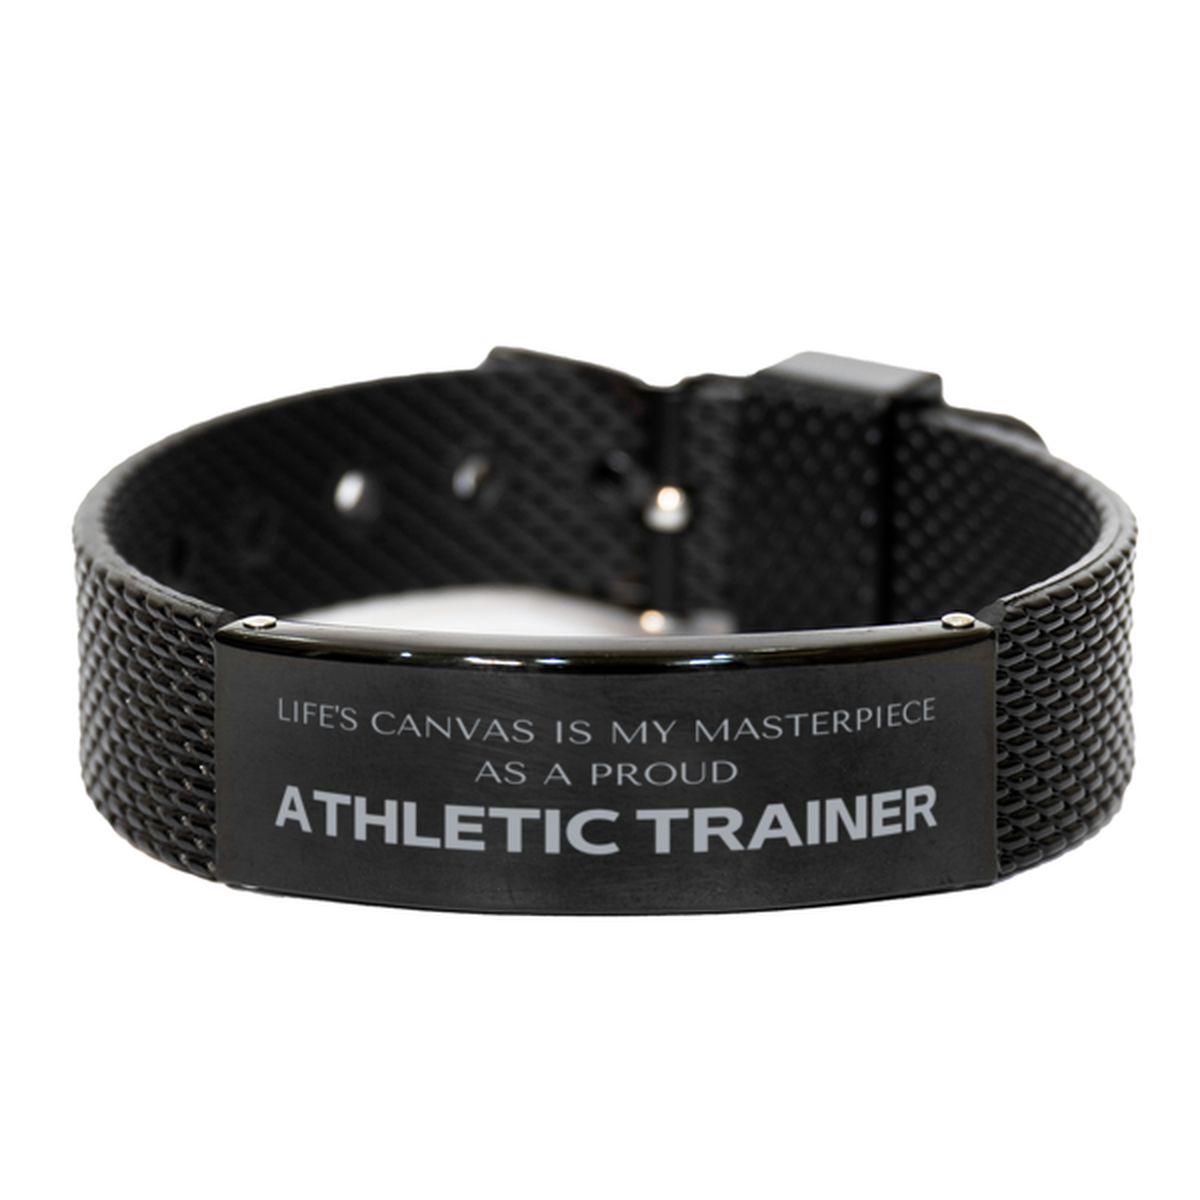 Proud Athletic Trainer Gifts, Life's canvas is my masterpiece, Epic Birthday Christmas Unique Black Shark Mesh Bracelet For Athletic Trainer, Coworkers, Men, Women, Friends